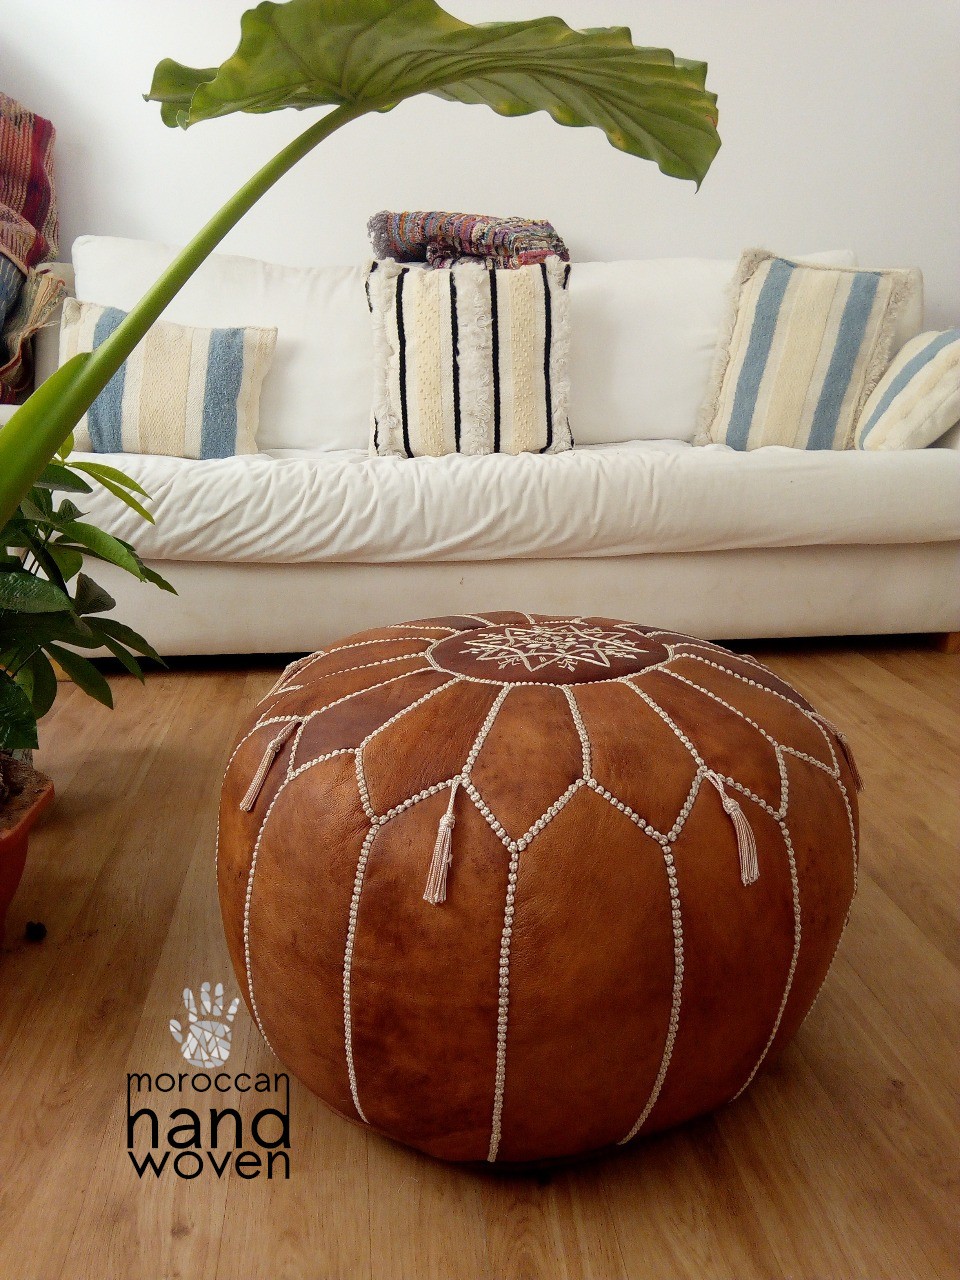 2x moroccan pouf Leather Ottoman Footstool Handmade tan & white Crafted and Home 